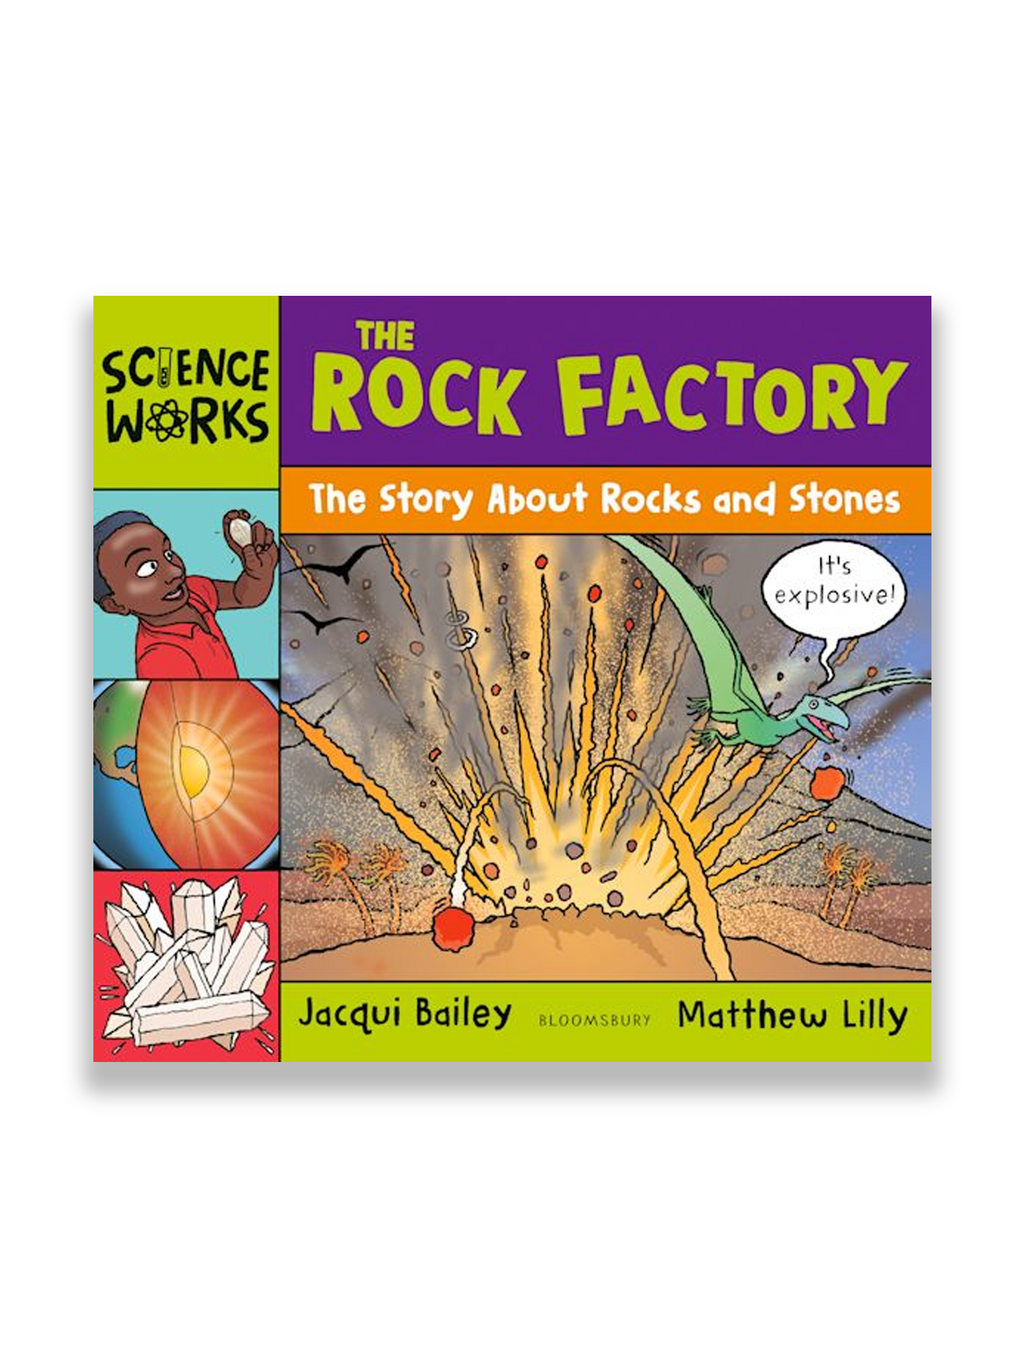 The Rock Factory: A Story about Rocks and Stones (Science Works)